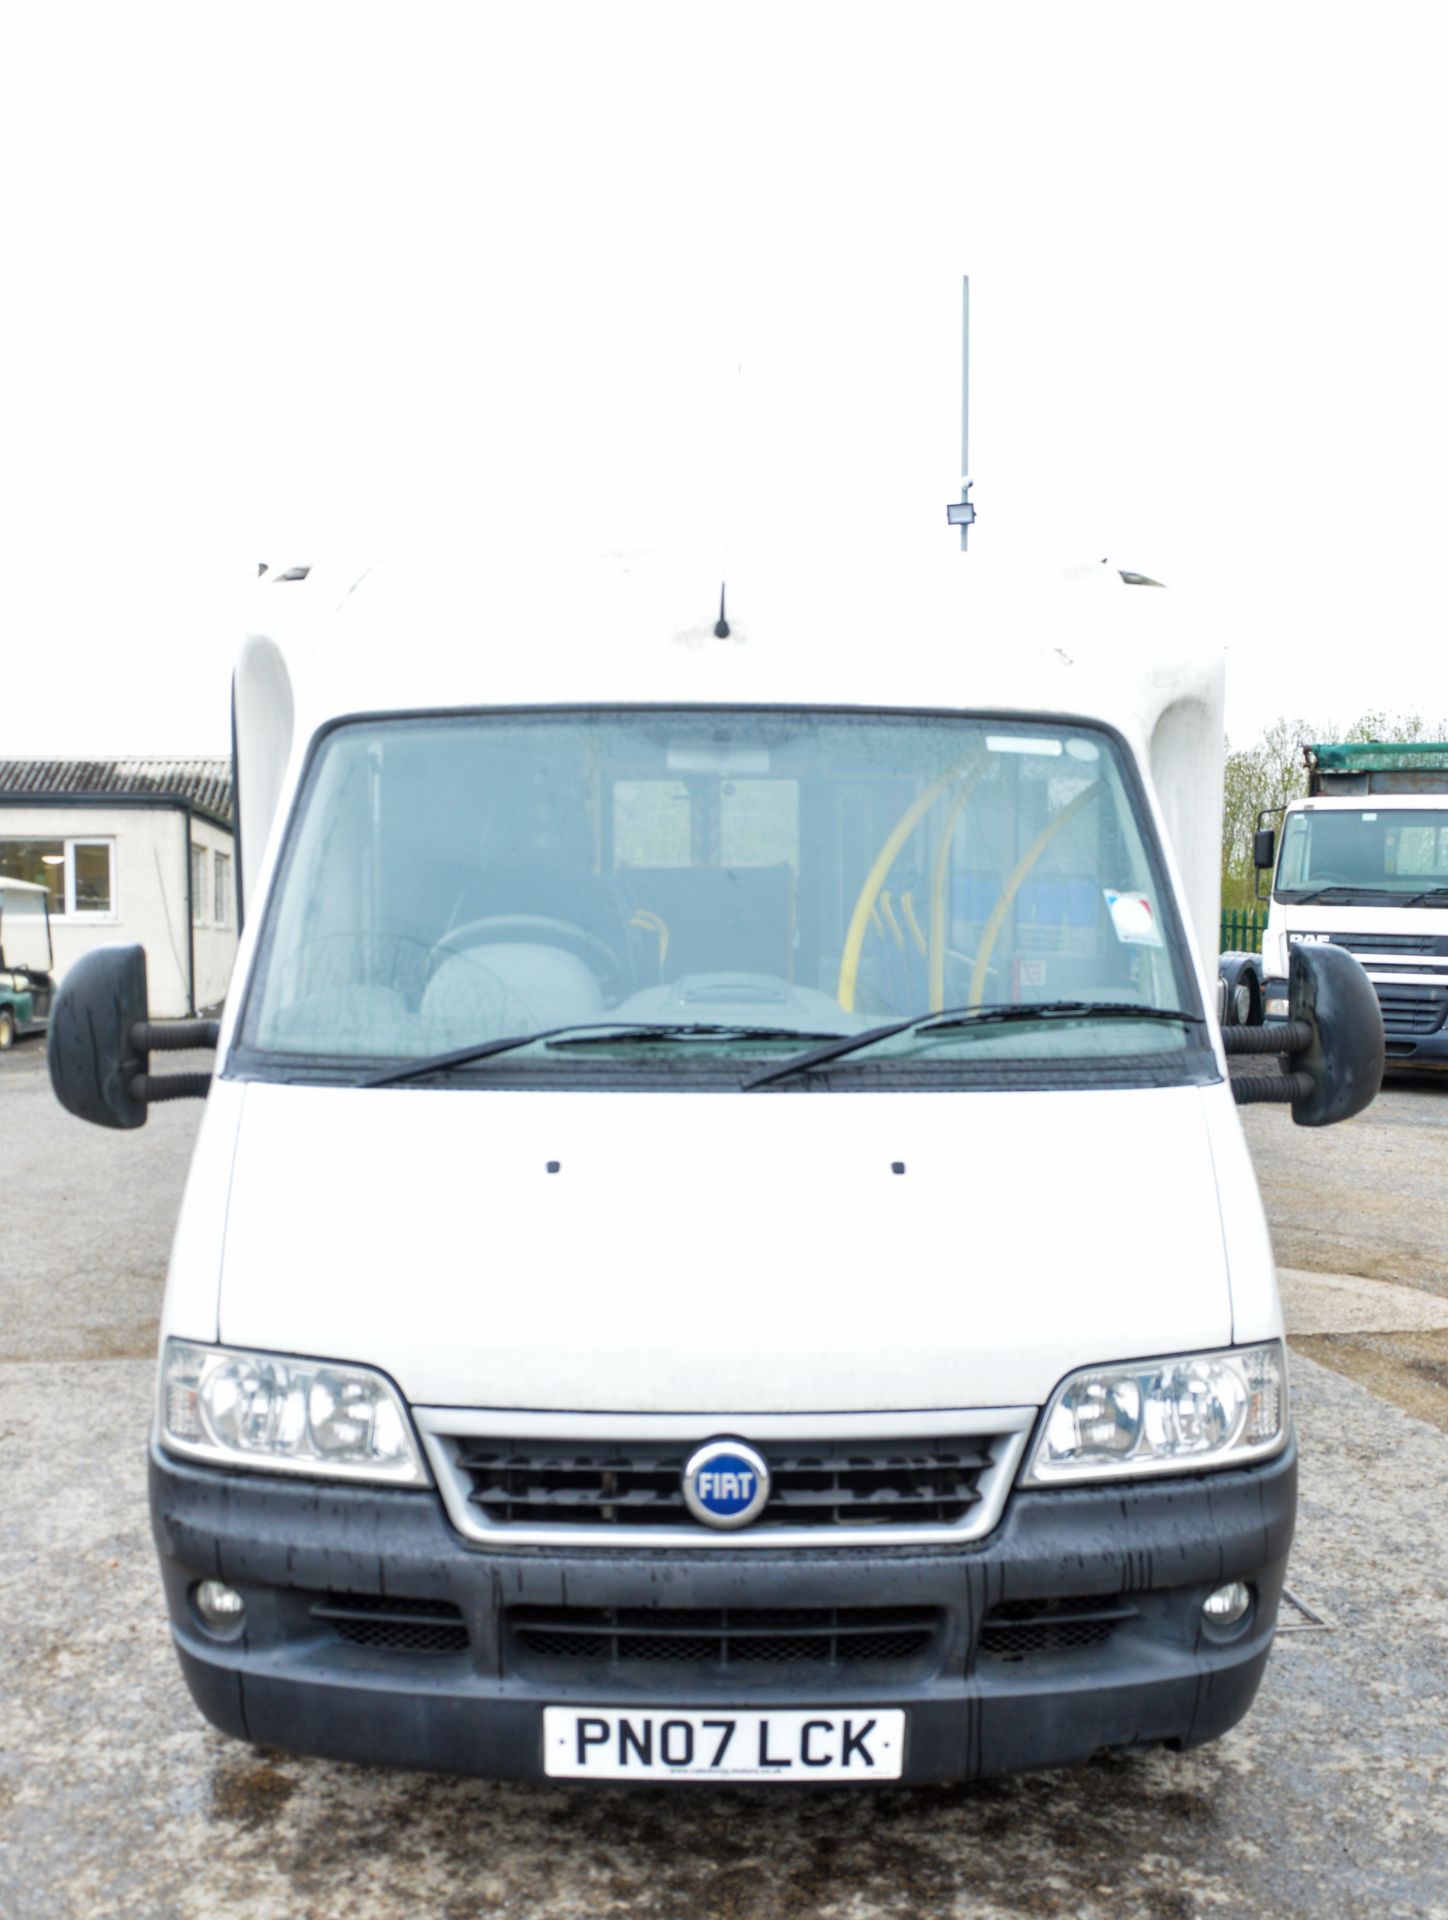 Fiat Ducato 15TD SWB wheelchair access minibus Registration Number: PN07 LCK Date of Registration: - Image 5 of 9